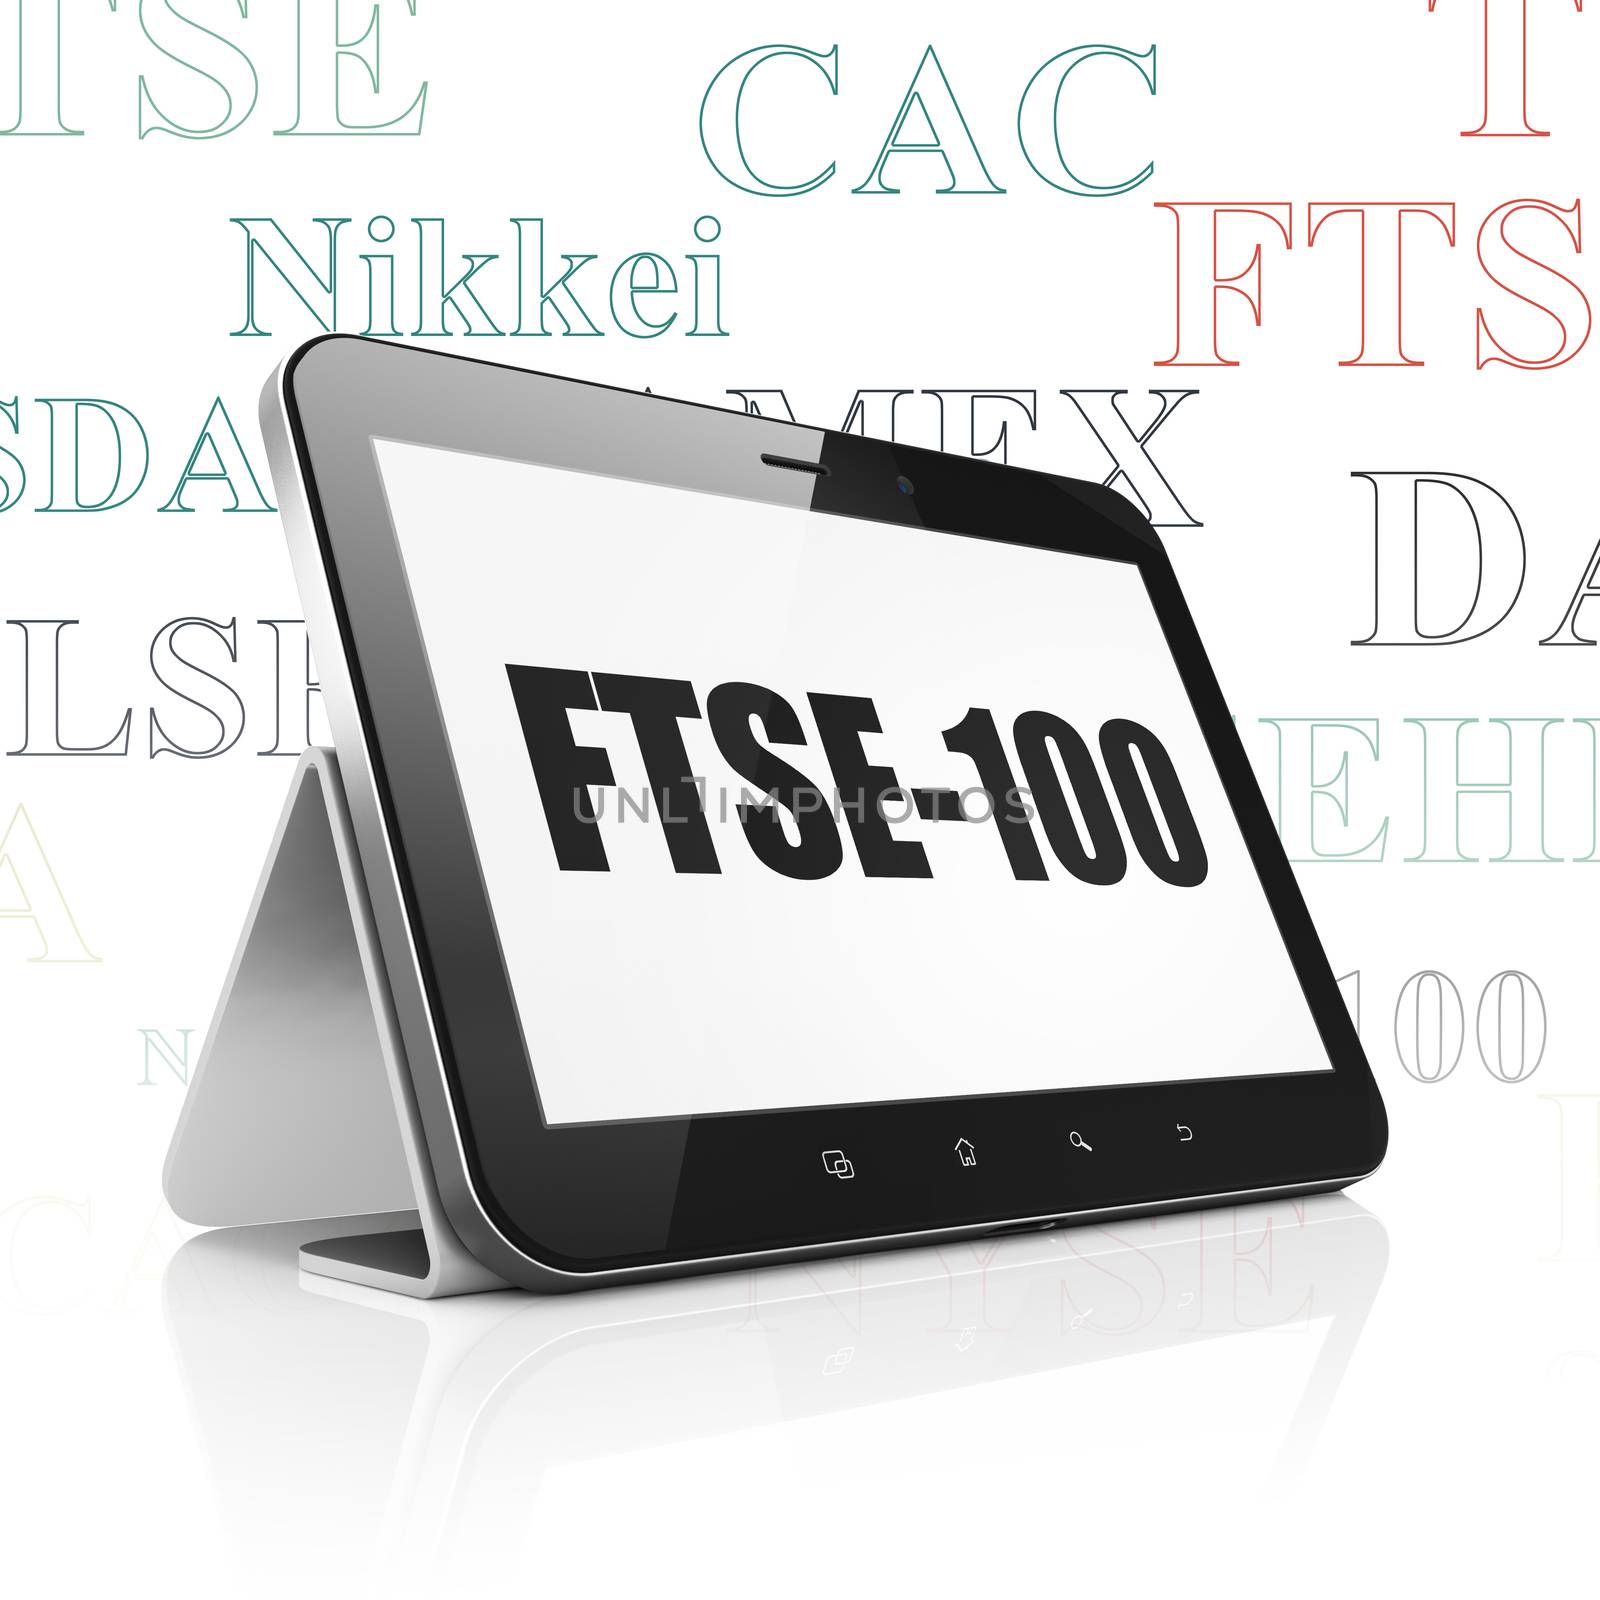 Stock market indexes concept: Tablet Computer with  black text FTSE-100 on display,  Tag Cloud background, 3D rendering